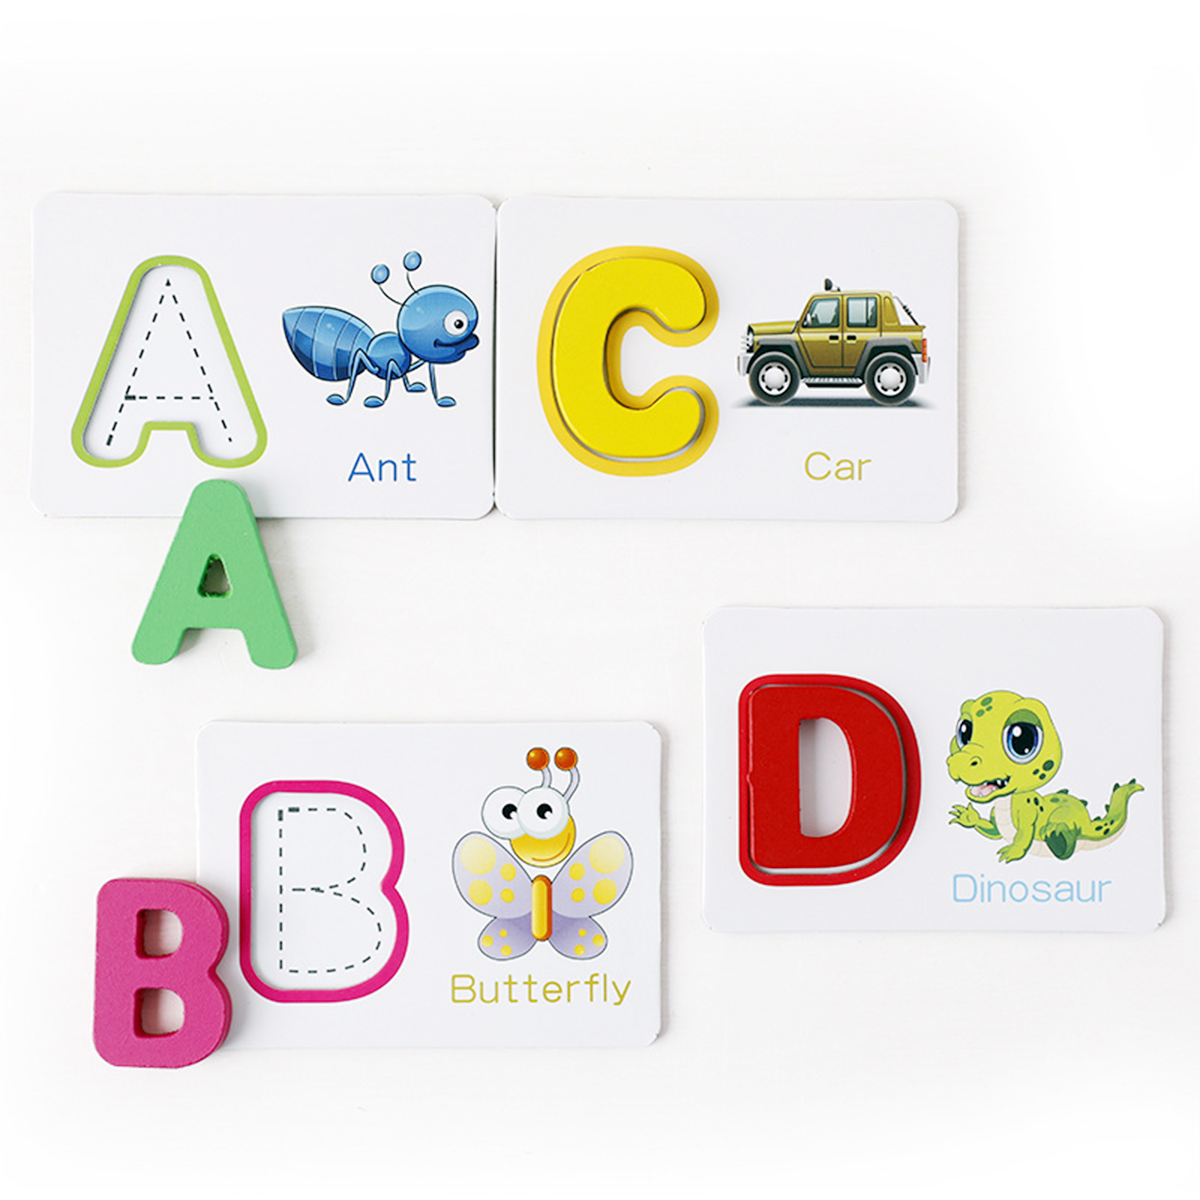 Puzzle-Alphabet-Spelling-English-Letters-Animal-Cards-Educational-Learning-Toy-for-Kids-Gift-1726968-7